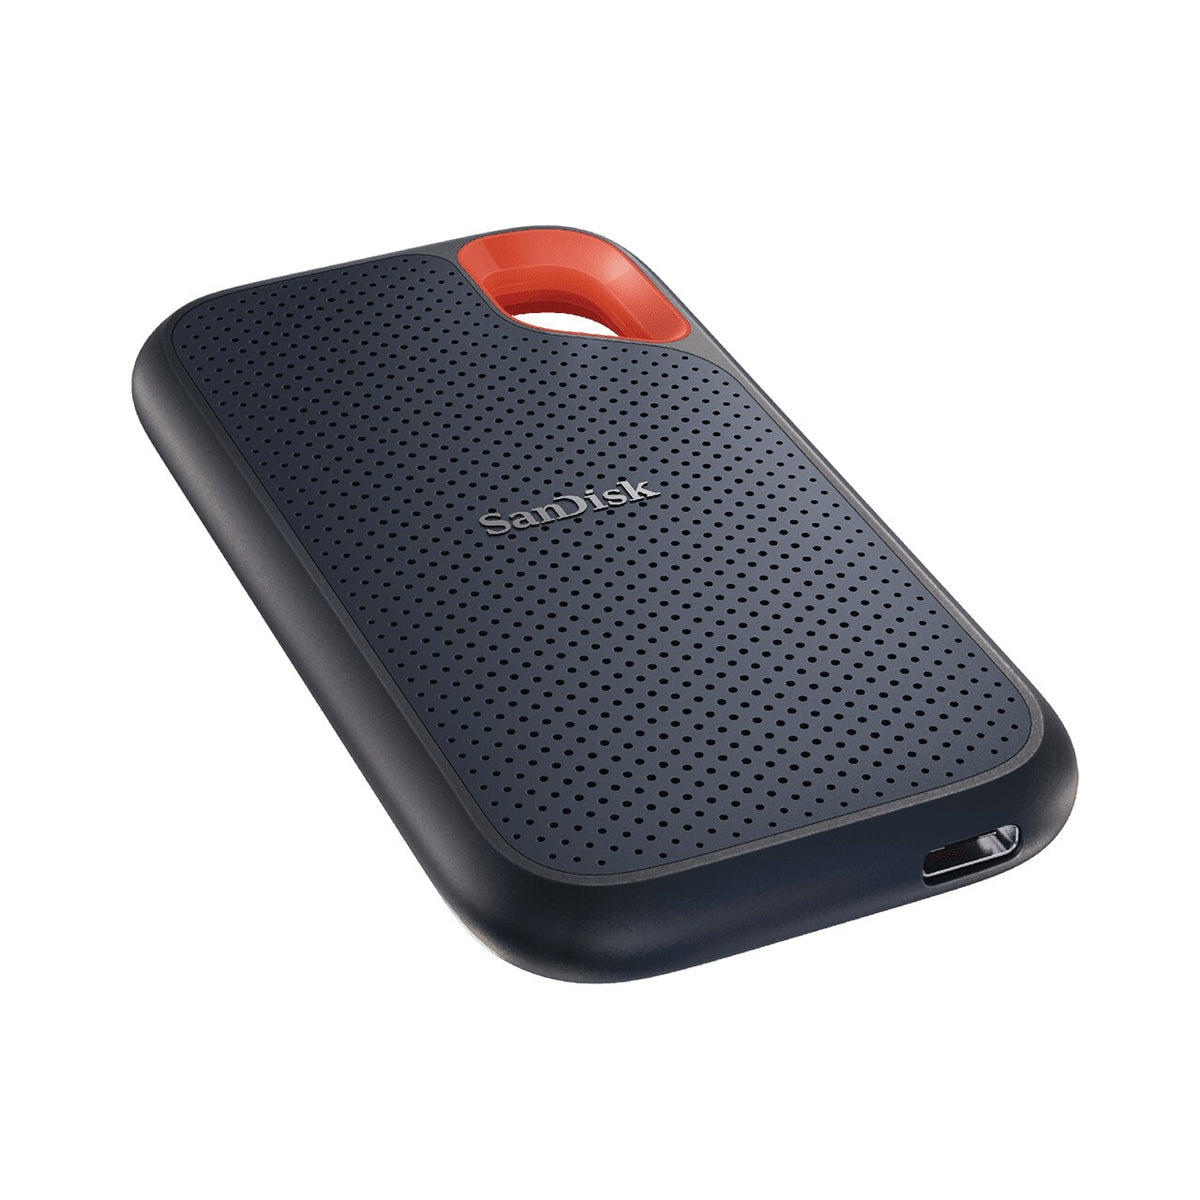 SanDisk Extreme Portable - External solid state drive - 2 TB